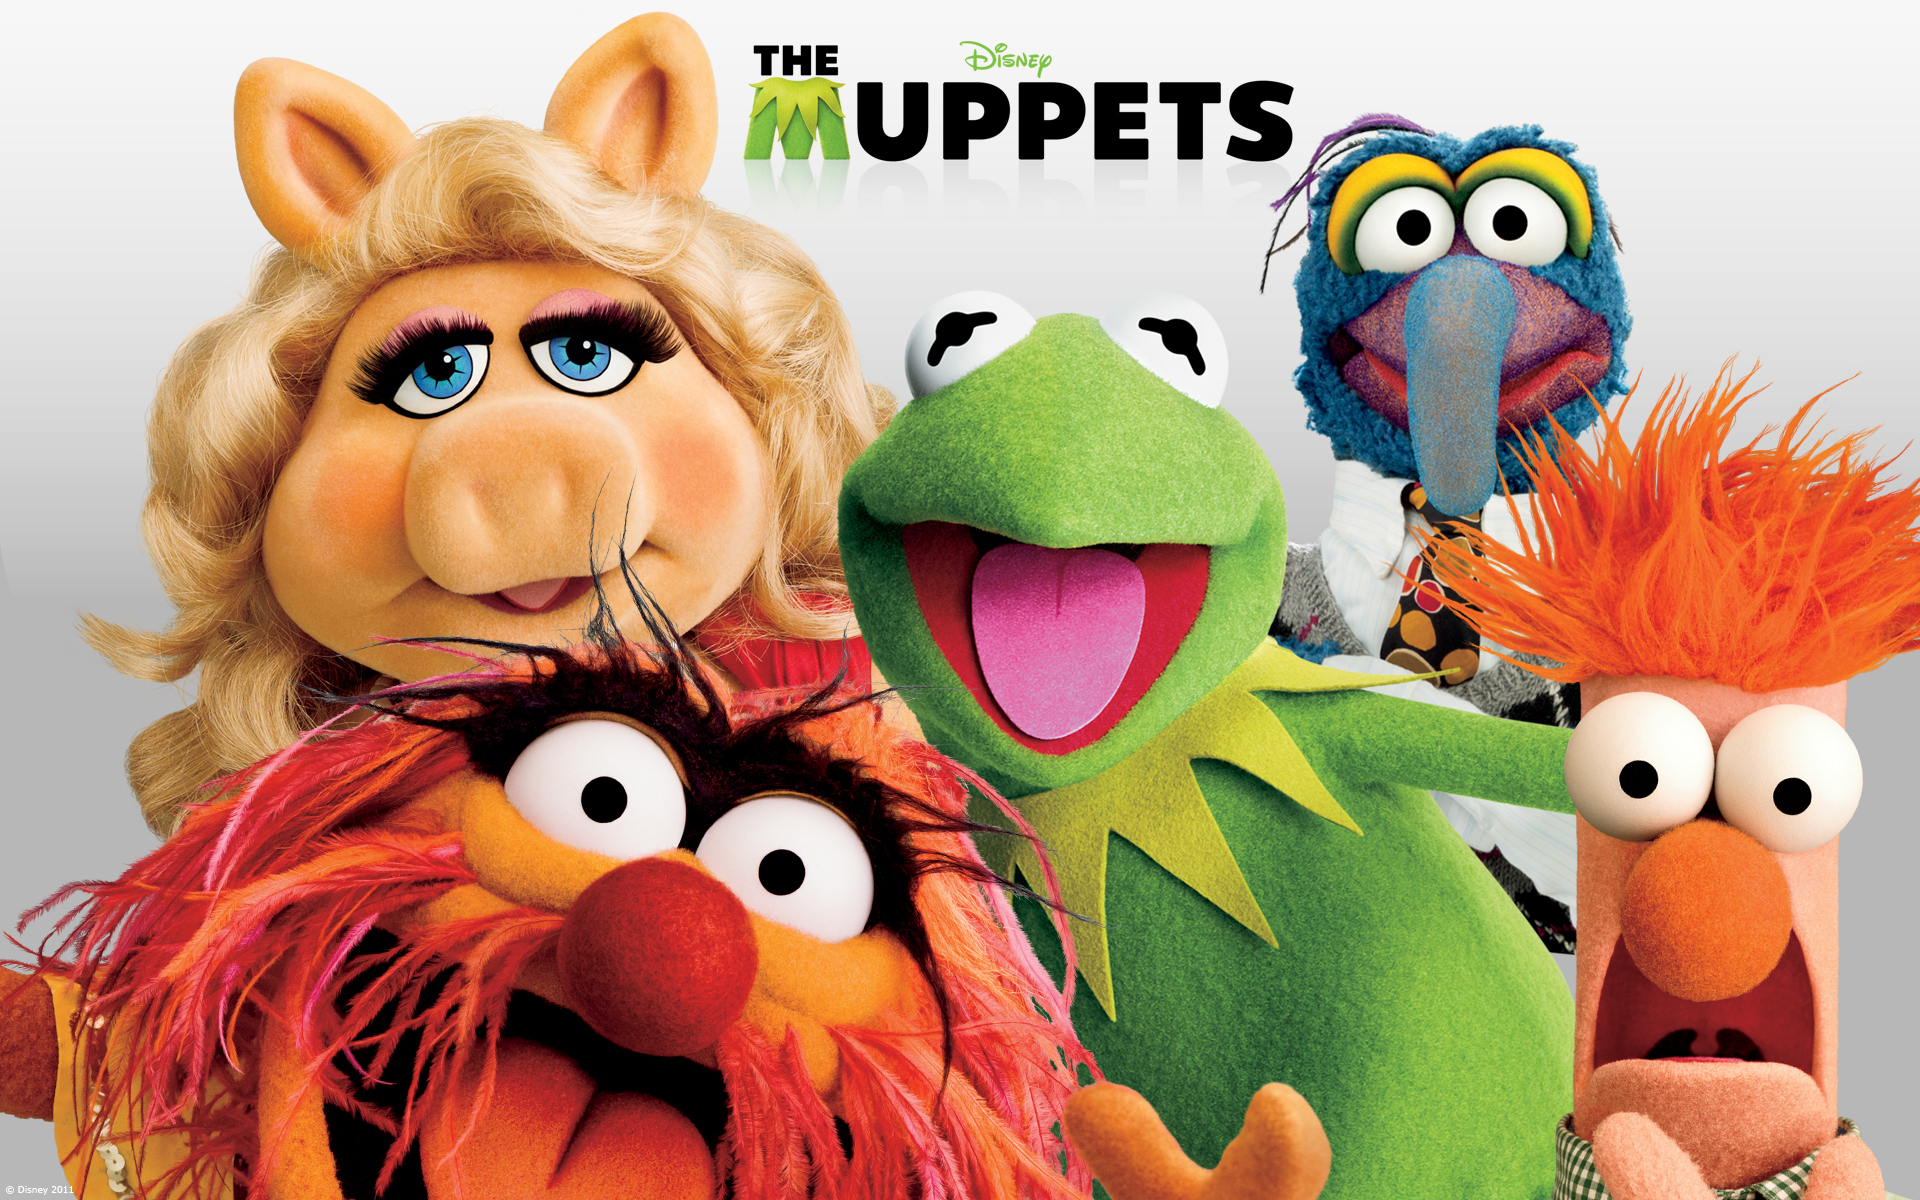 The Muppets #1